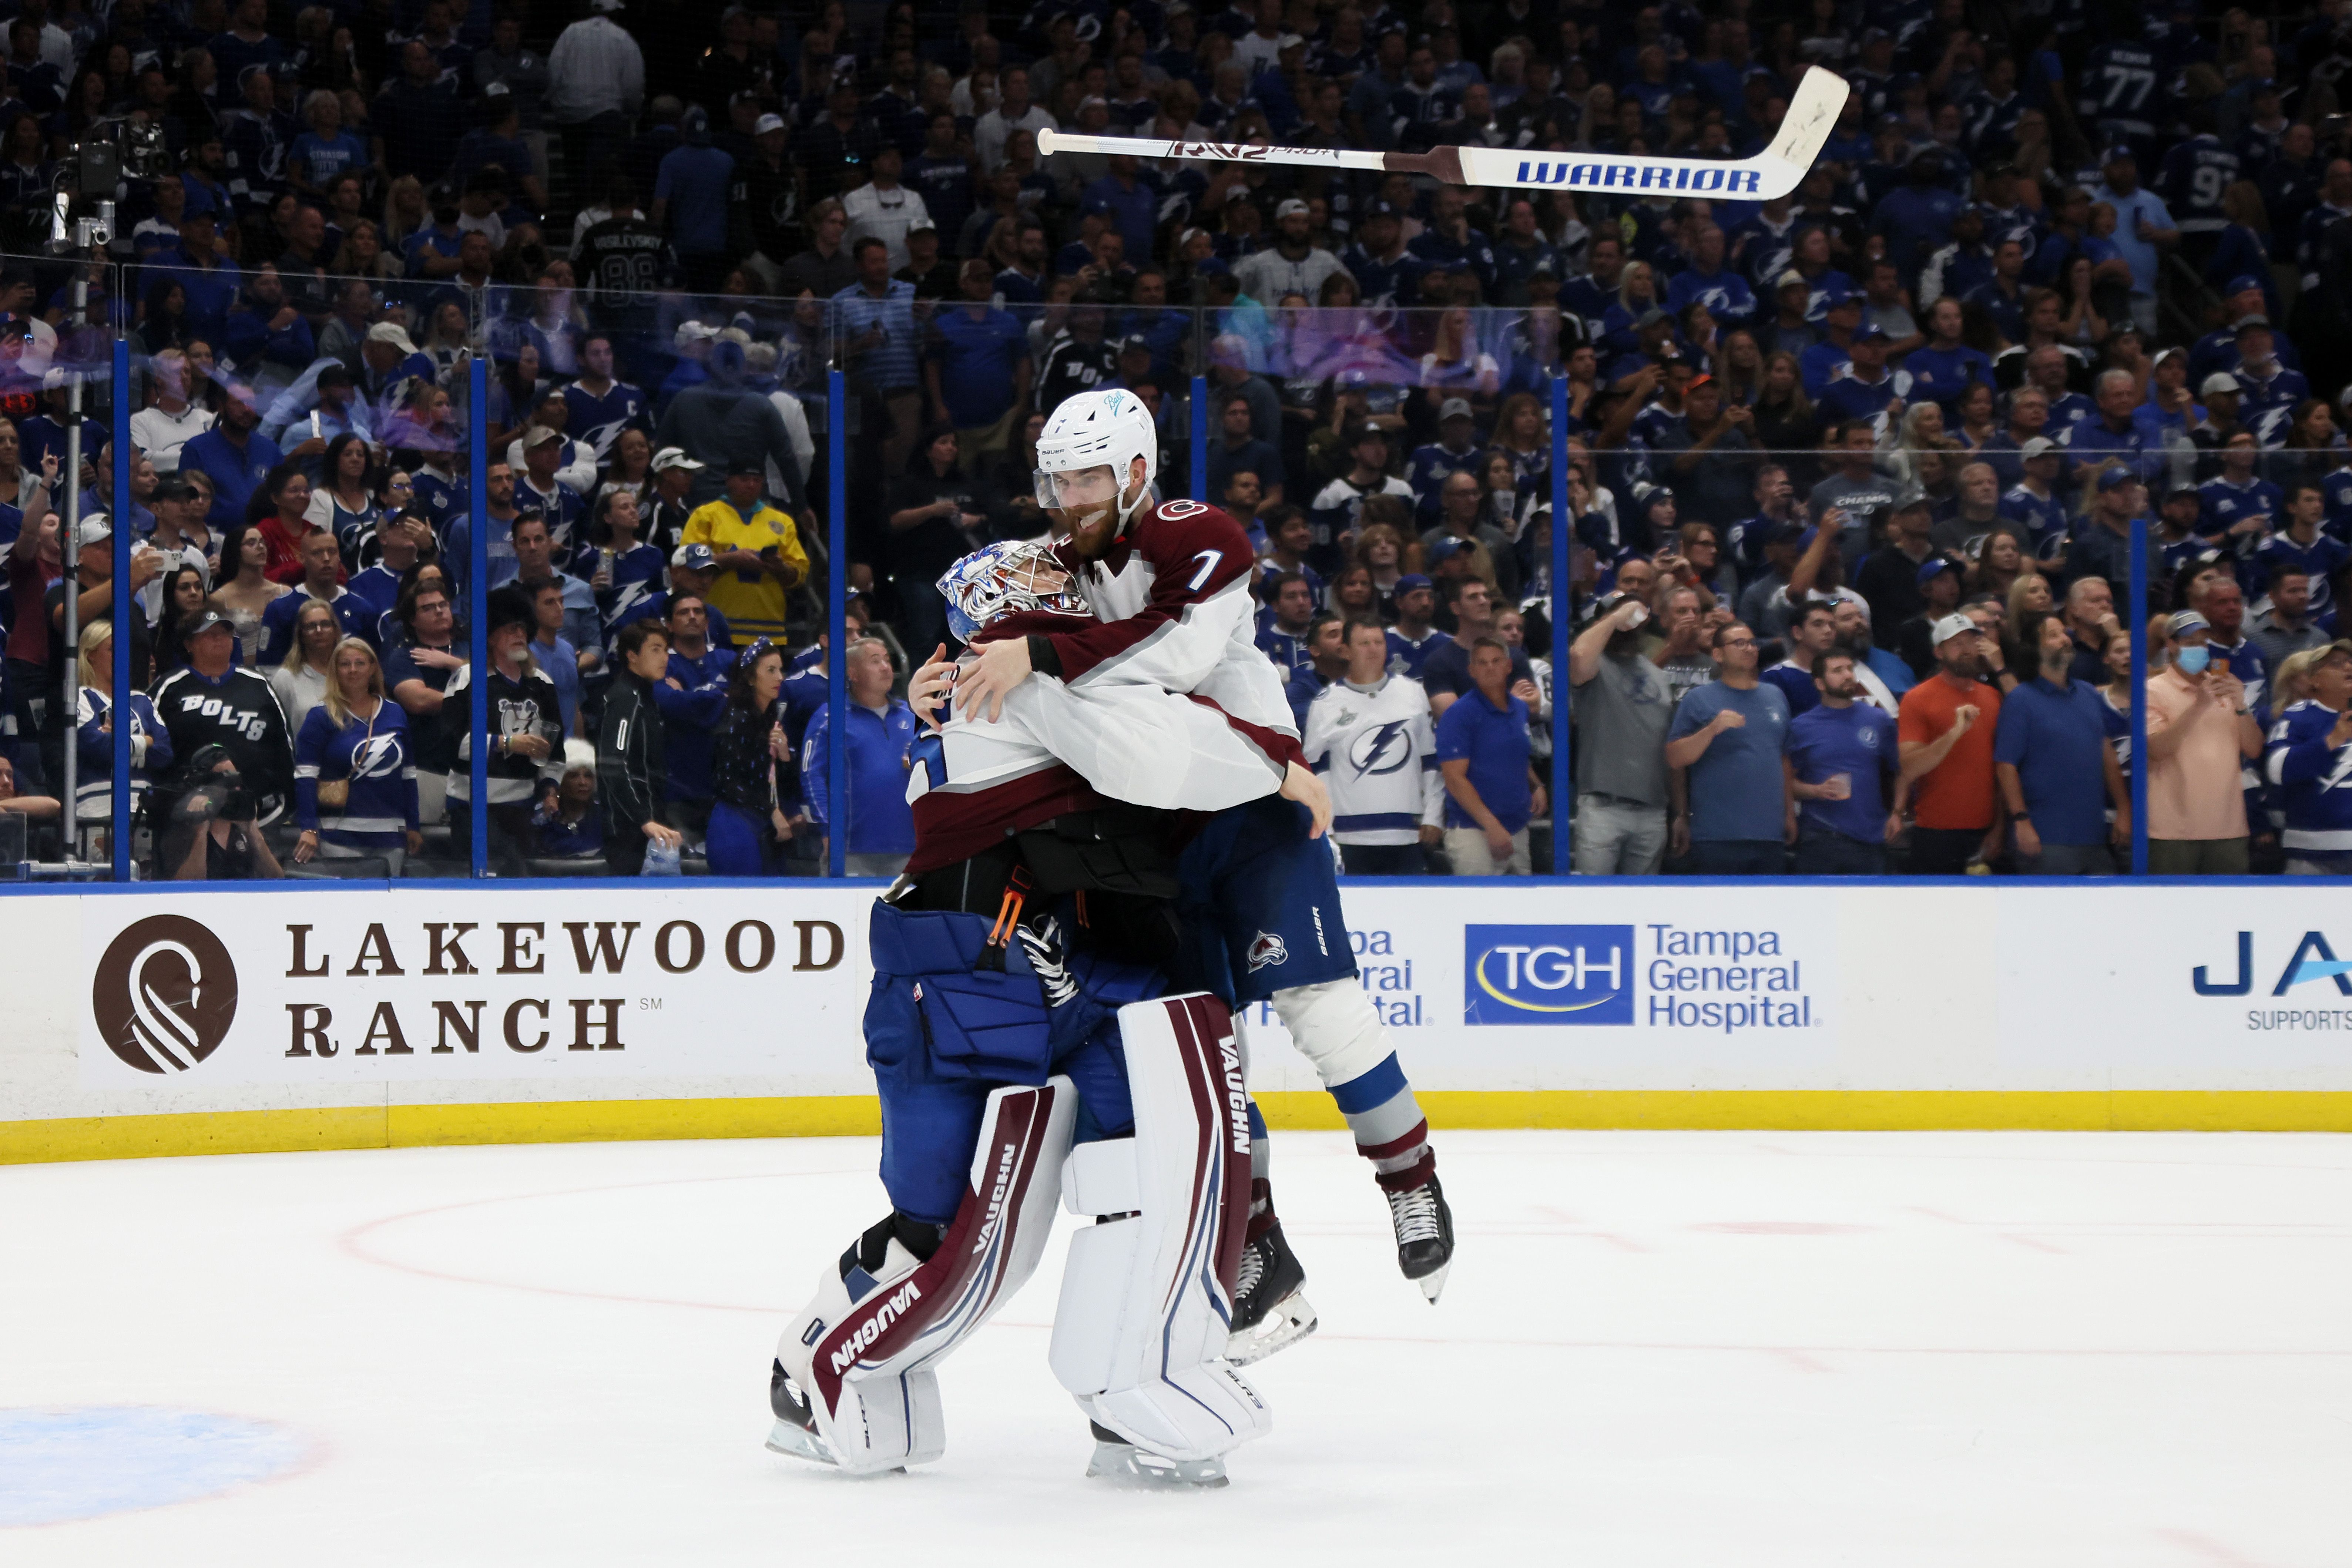 Darcy Kuemper #35 and Devon Toews #7 of the Colorado Avalanche celebrate after defeating the Tampa Bay Lightning 2-1 .